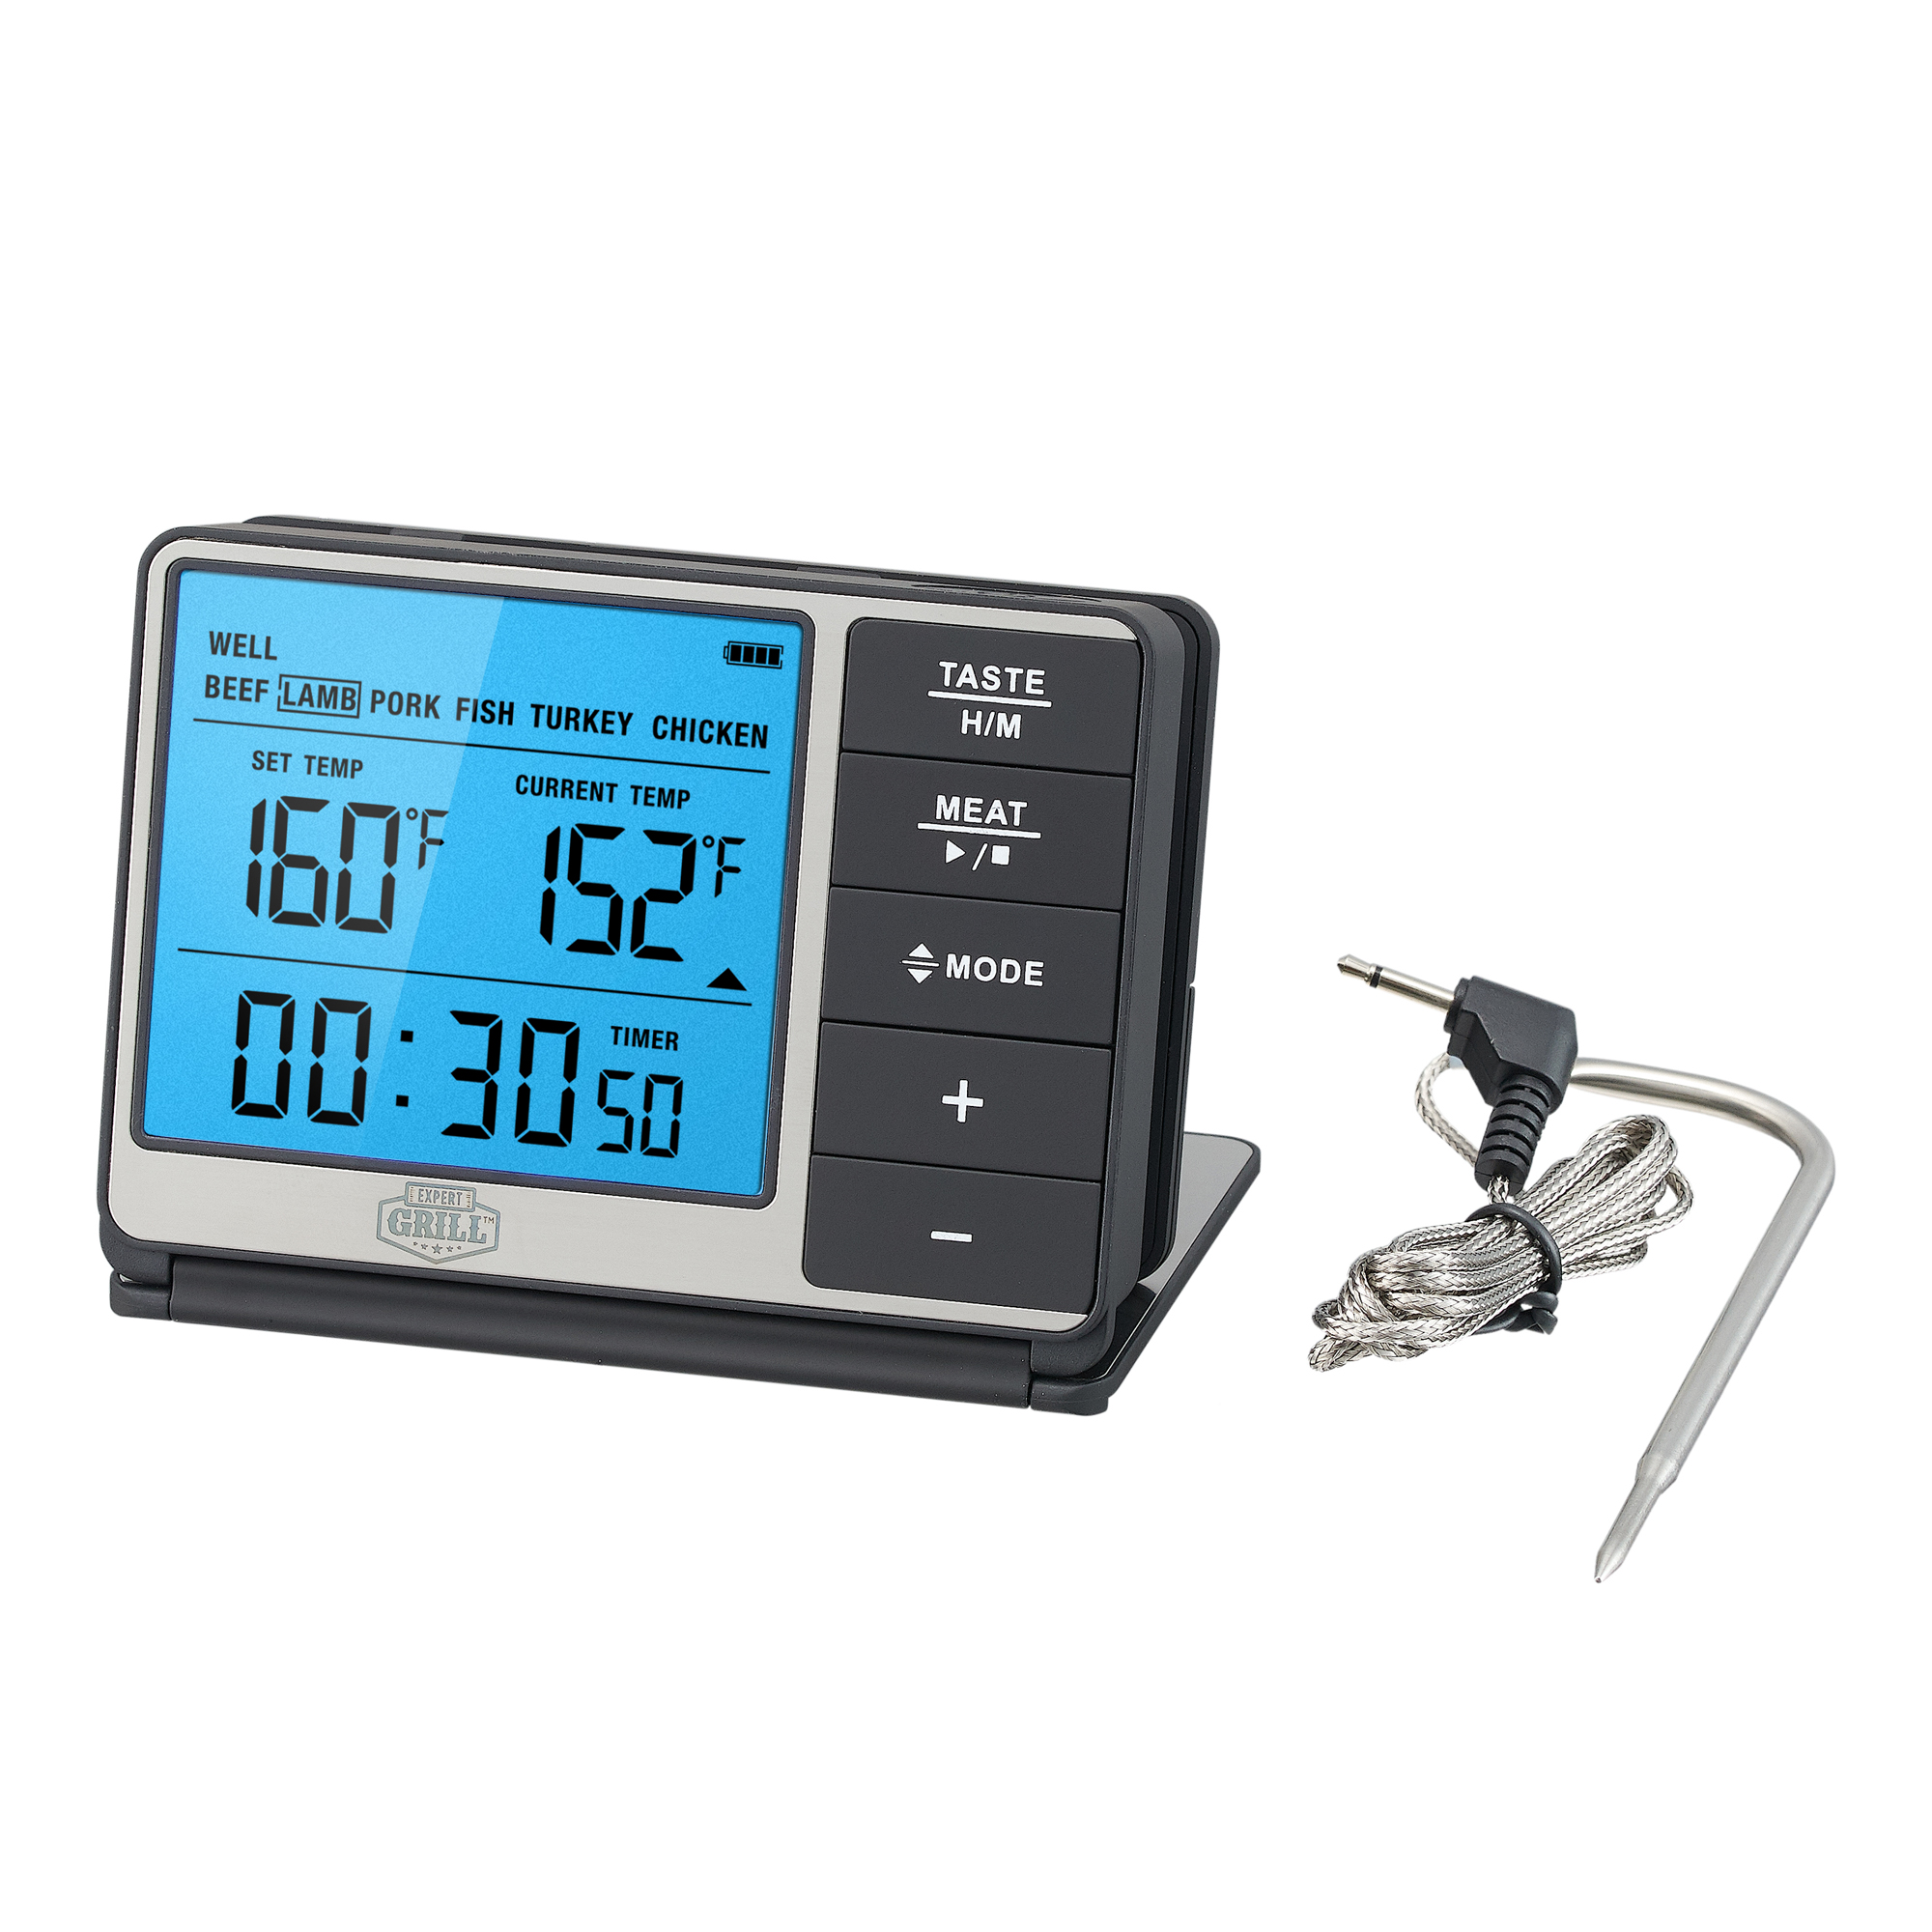 Expert Grill ABS Deluxe Digital BBQ Grilling Meat Thermometer - image 3 of 11